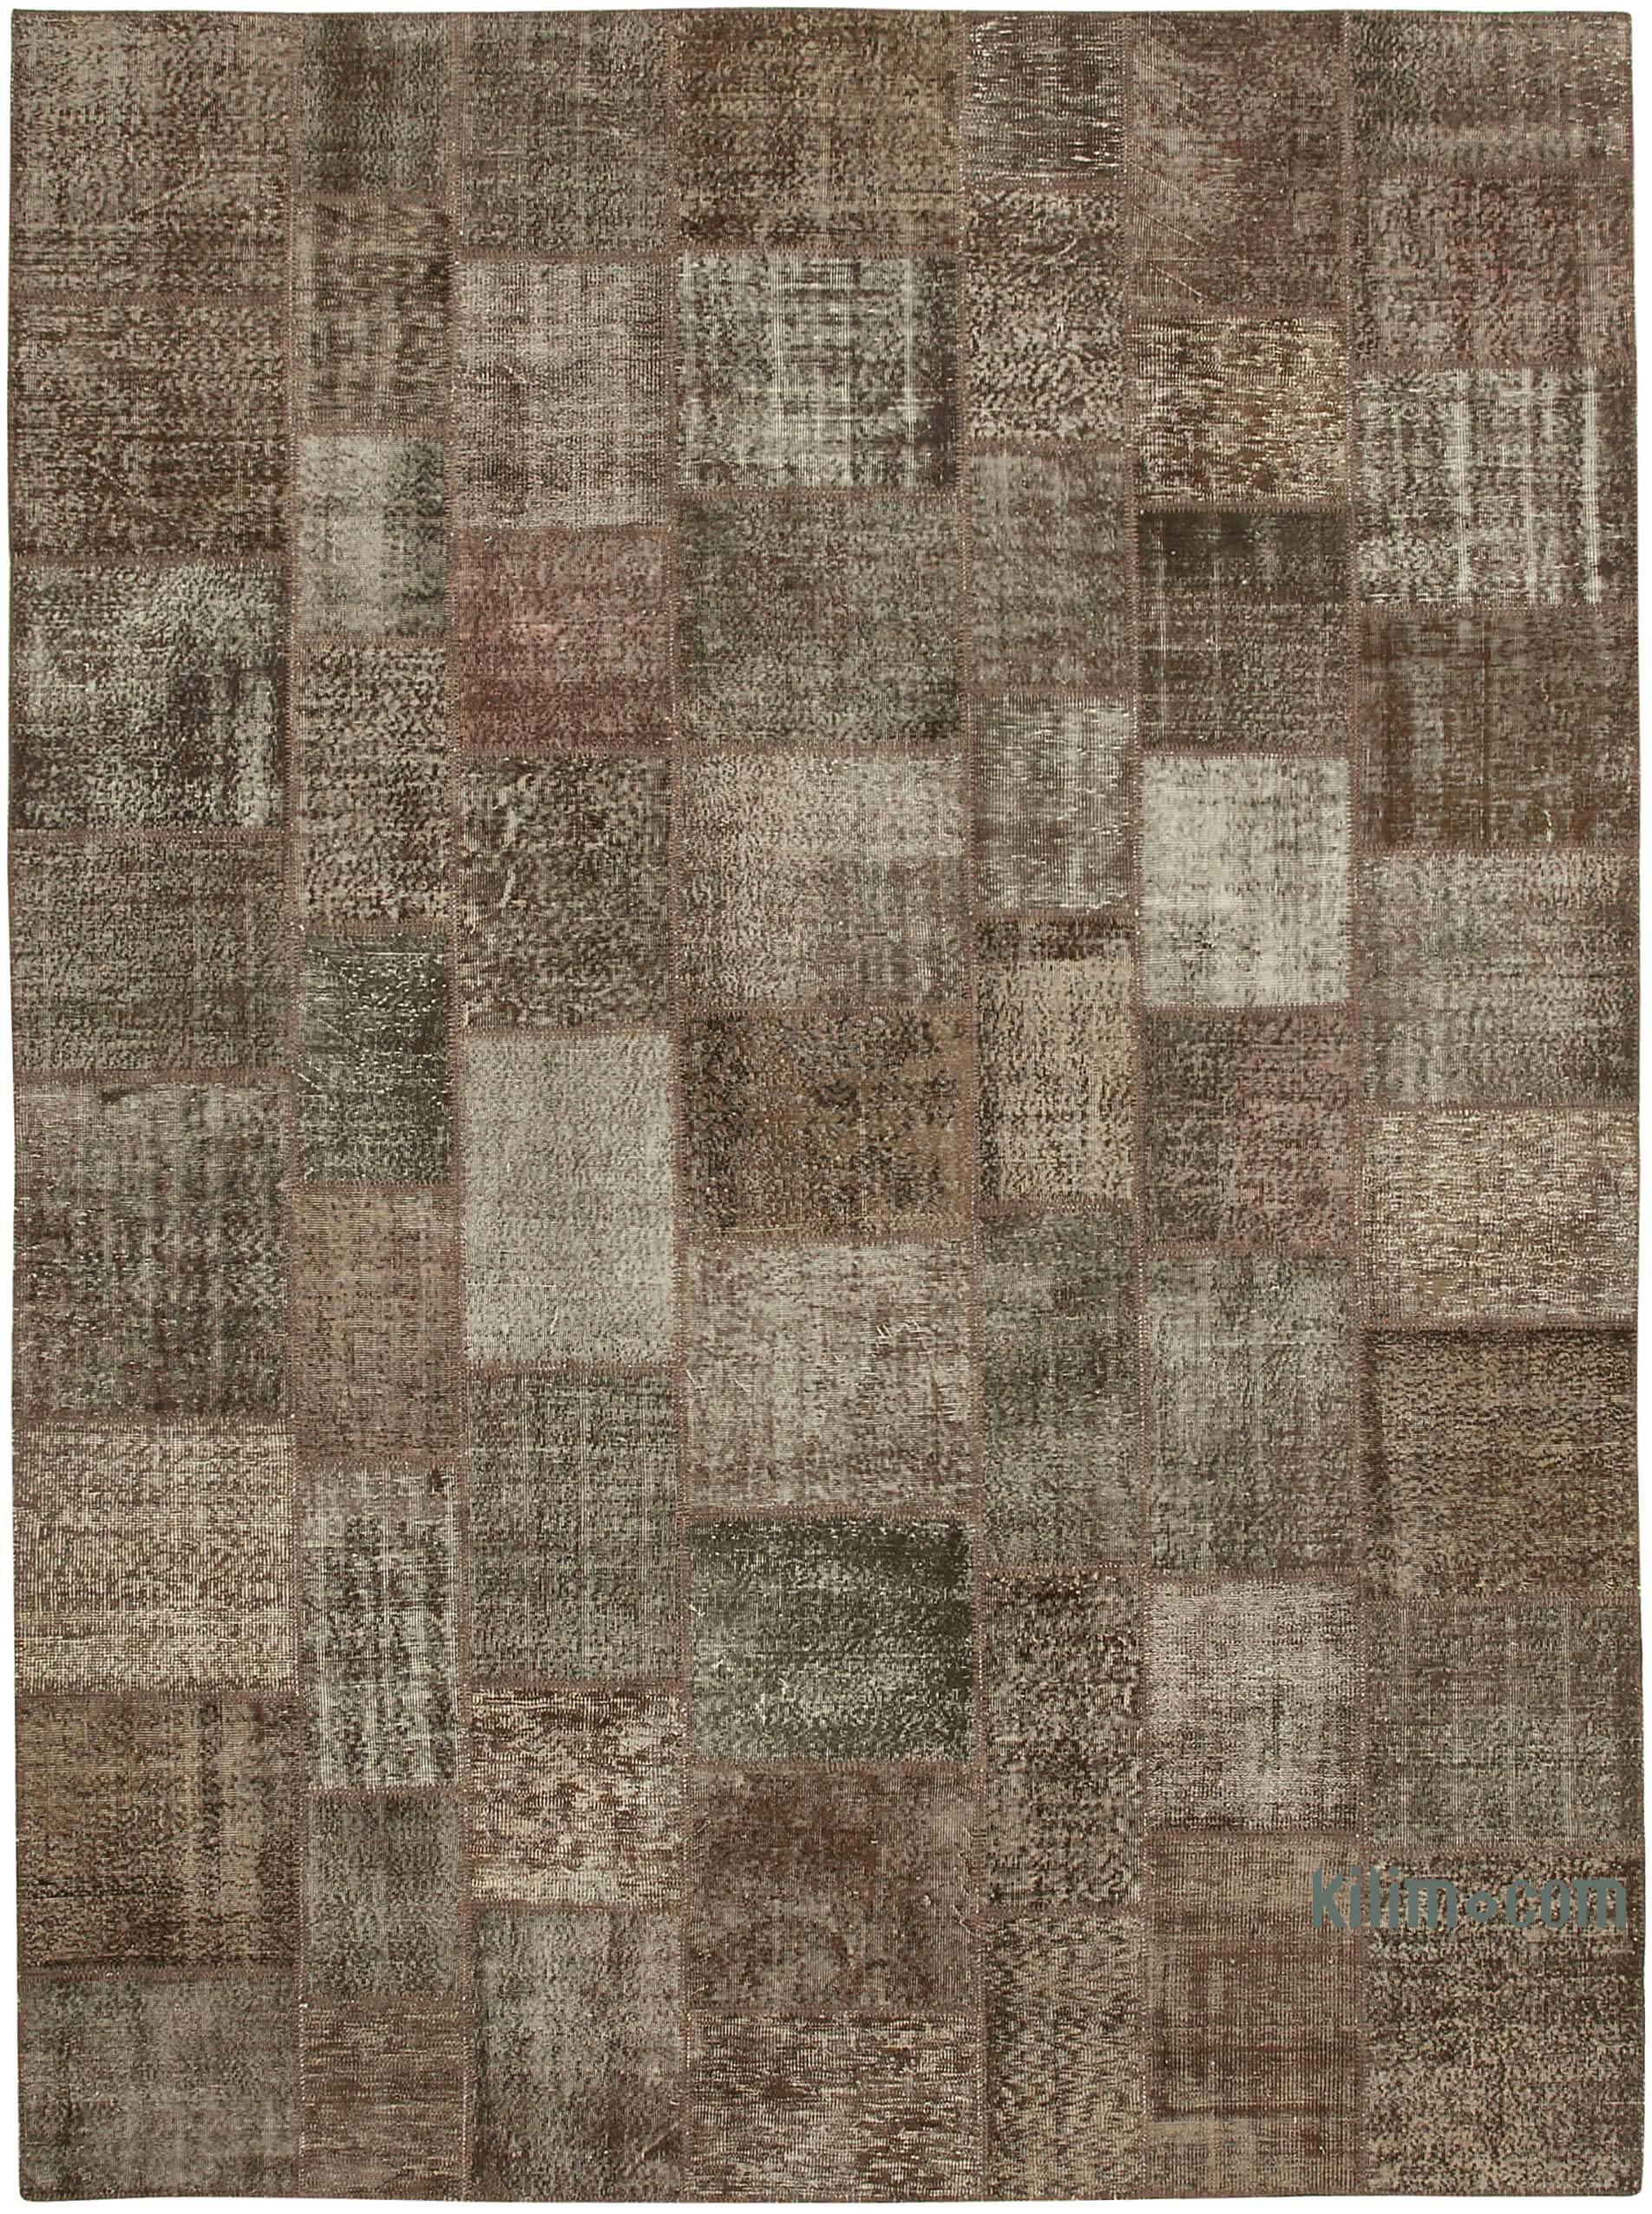 K0049480 Patchwork Hand-Knotted Turkish Rug - 9' 9 x 13' 3 (117